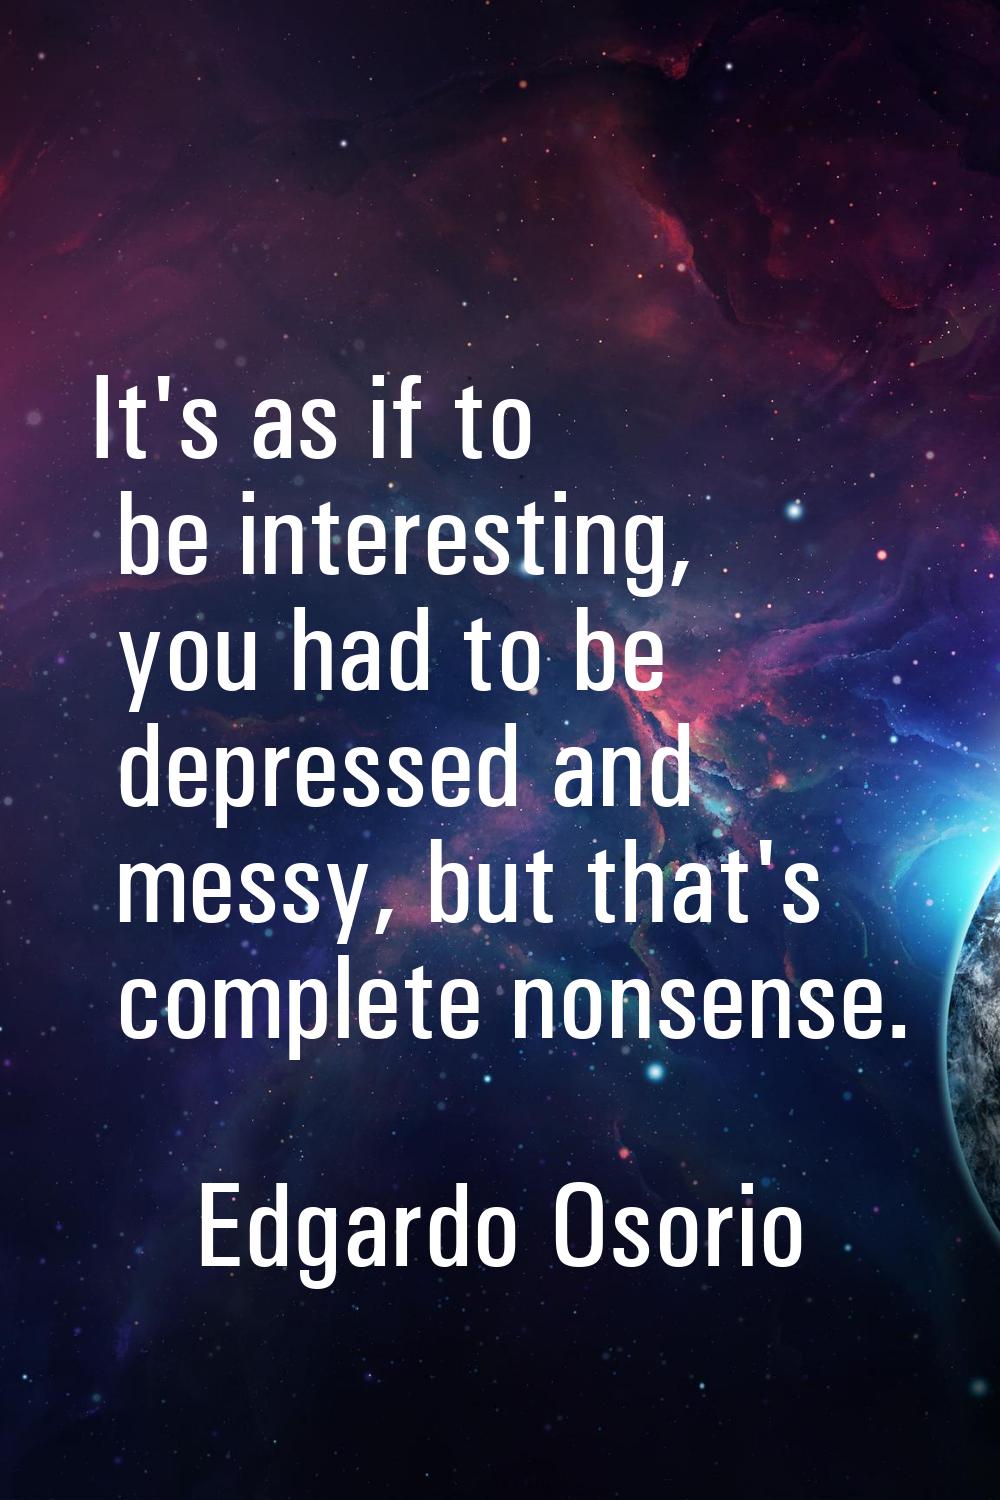 It's as if to be interesting, you had to be depressed and messy, but that's complete nonsense.